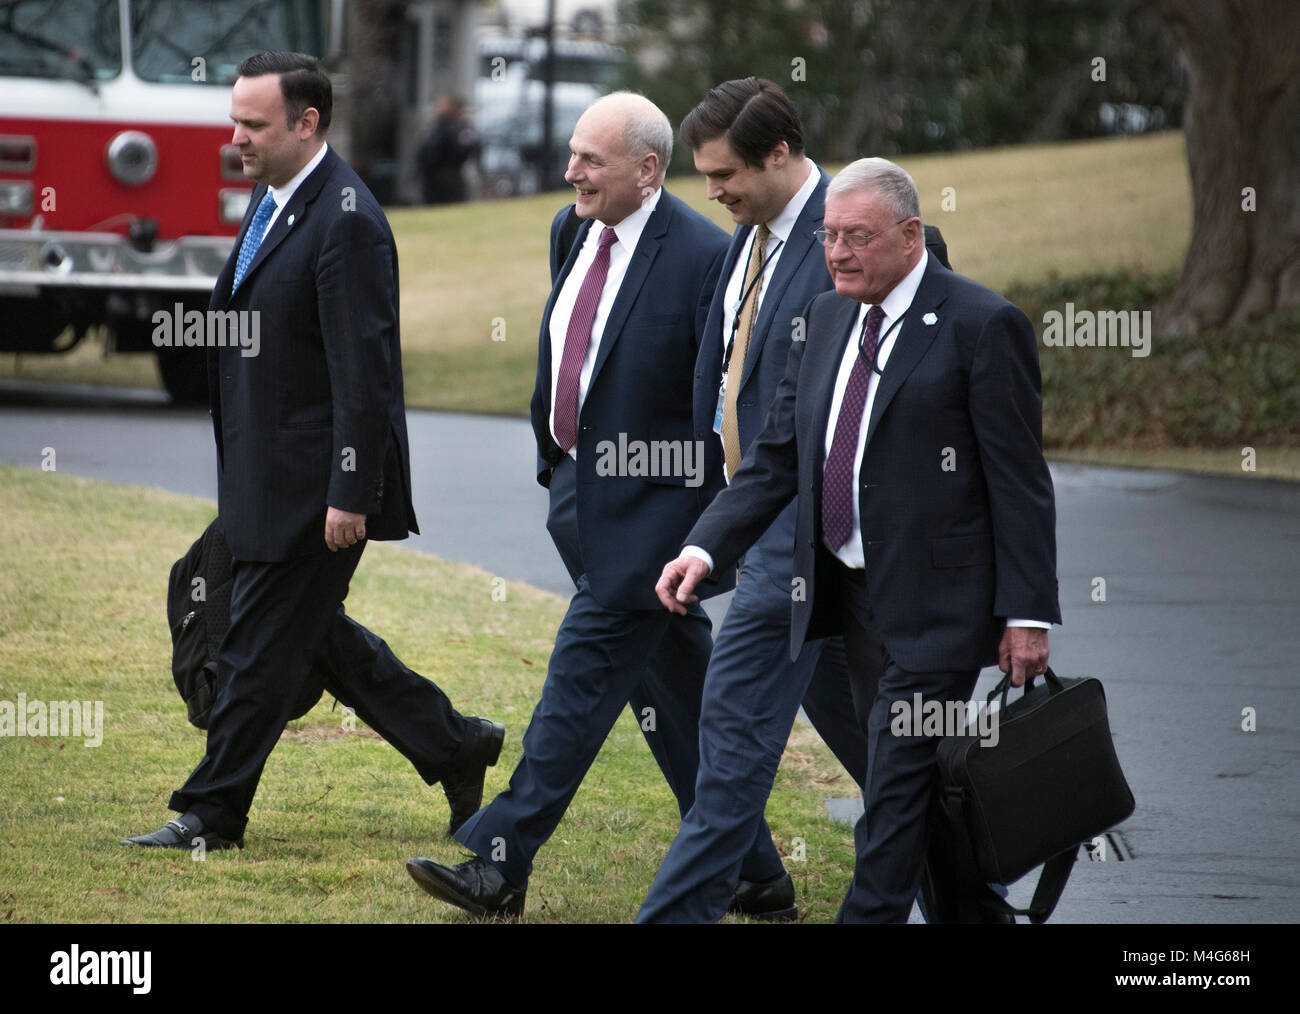 From left to right: Dan Scavino, White House Director of Social Media and Assistant to the President; General John Kelly, White House Chief of Staff; Johnny DeStefano, Assistant to President Donald Trump and Director of the Office of Presidential Personnel; and General Joseph "Keith" Kellogg Jr., chief of staff and executive secretary for the National Security Council, walk to Marine One to accompany United States President Donald J. Trump from the White House in Washington, DC for a trip to Mar-a-Lago, Florida for the week-end on Friday, February 16, 2018. Credit: Ron Sachs/CNP /MediaPunch Stock Photo